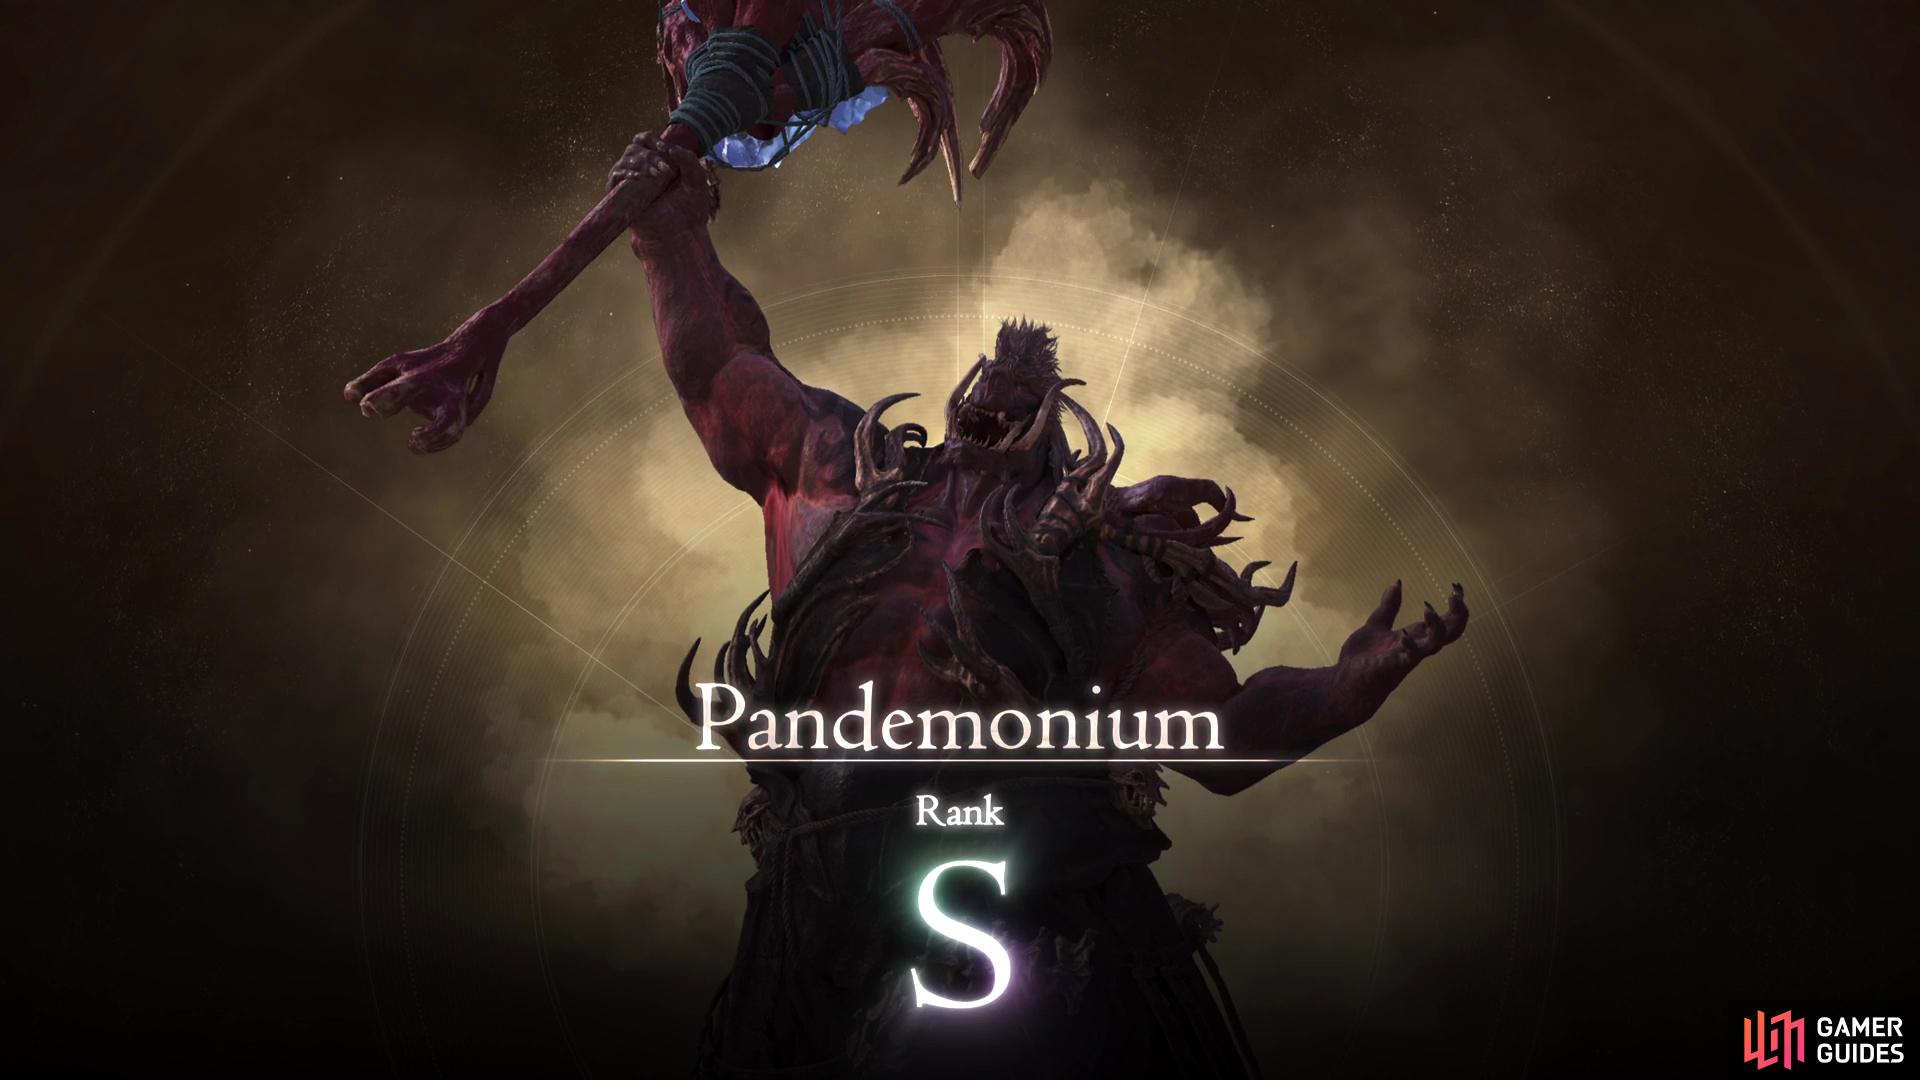 Pandemonium becomes available during the Footfalls of !Ash main scenario quest.